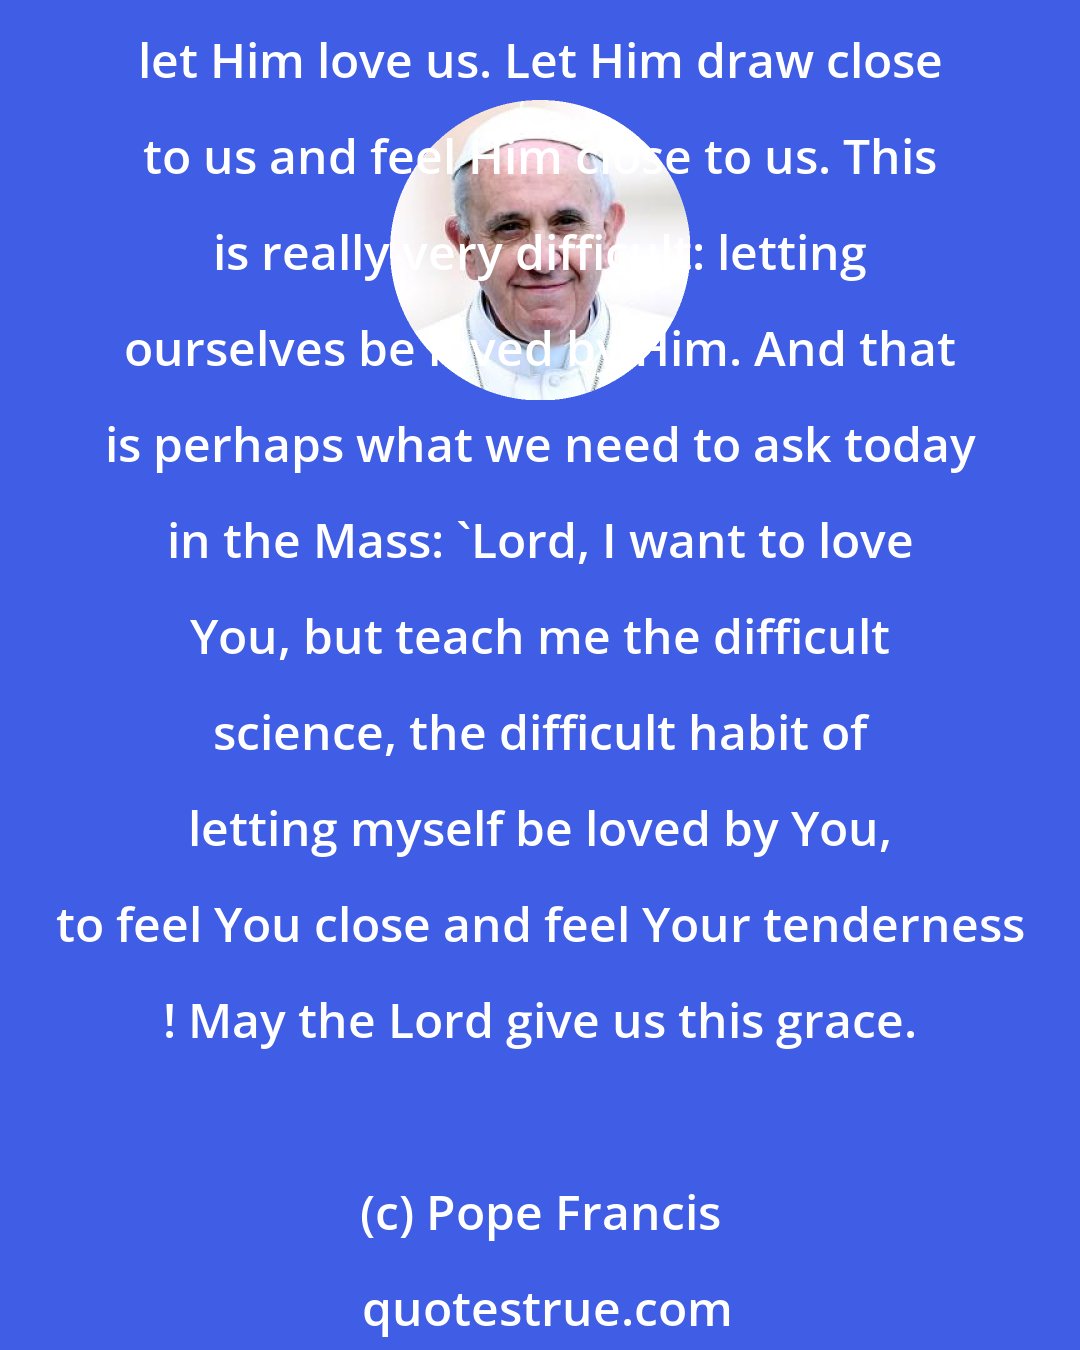 Pope Francis: This may sound like heresy, but it is the greatest truth! It is more difficult to let God love us, than to love Him! The best way to love Him in return is to open our hearts and let Him love us. Let Him draw close to us and feel Him close to us. This is really very difficult: letting ourselves be loved by Him. And that is perhaps what we need to ask today in the Mass: 'Lord, I want to love You, but teach me the difficult science, the difficult habit of letting myself be loved by You, to feel You close and feel Your tenderness ! May the Lord give us this grace.